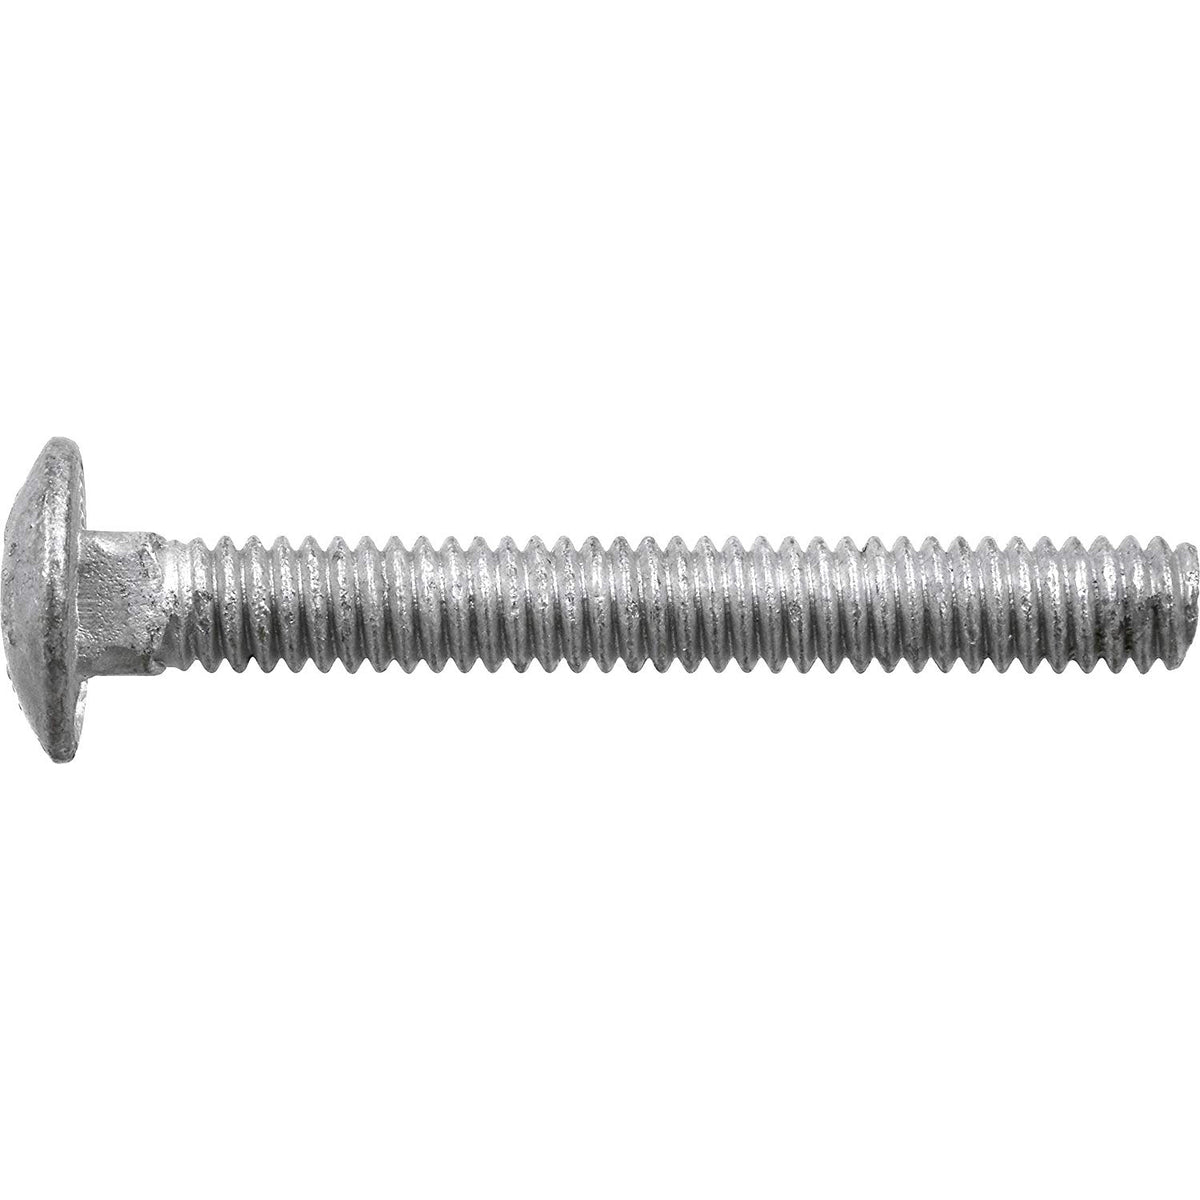 Hillman 812545 Flat Head Carriage Bolts, Galvanized, 5/16" x 2", 100-Count